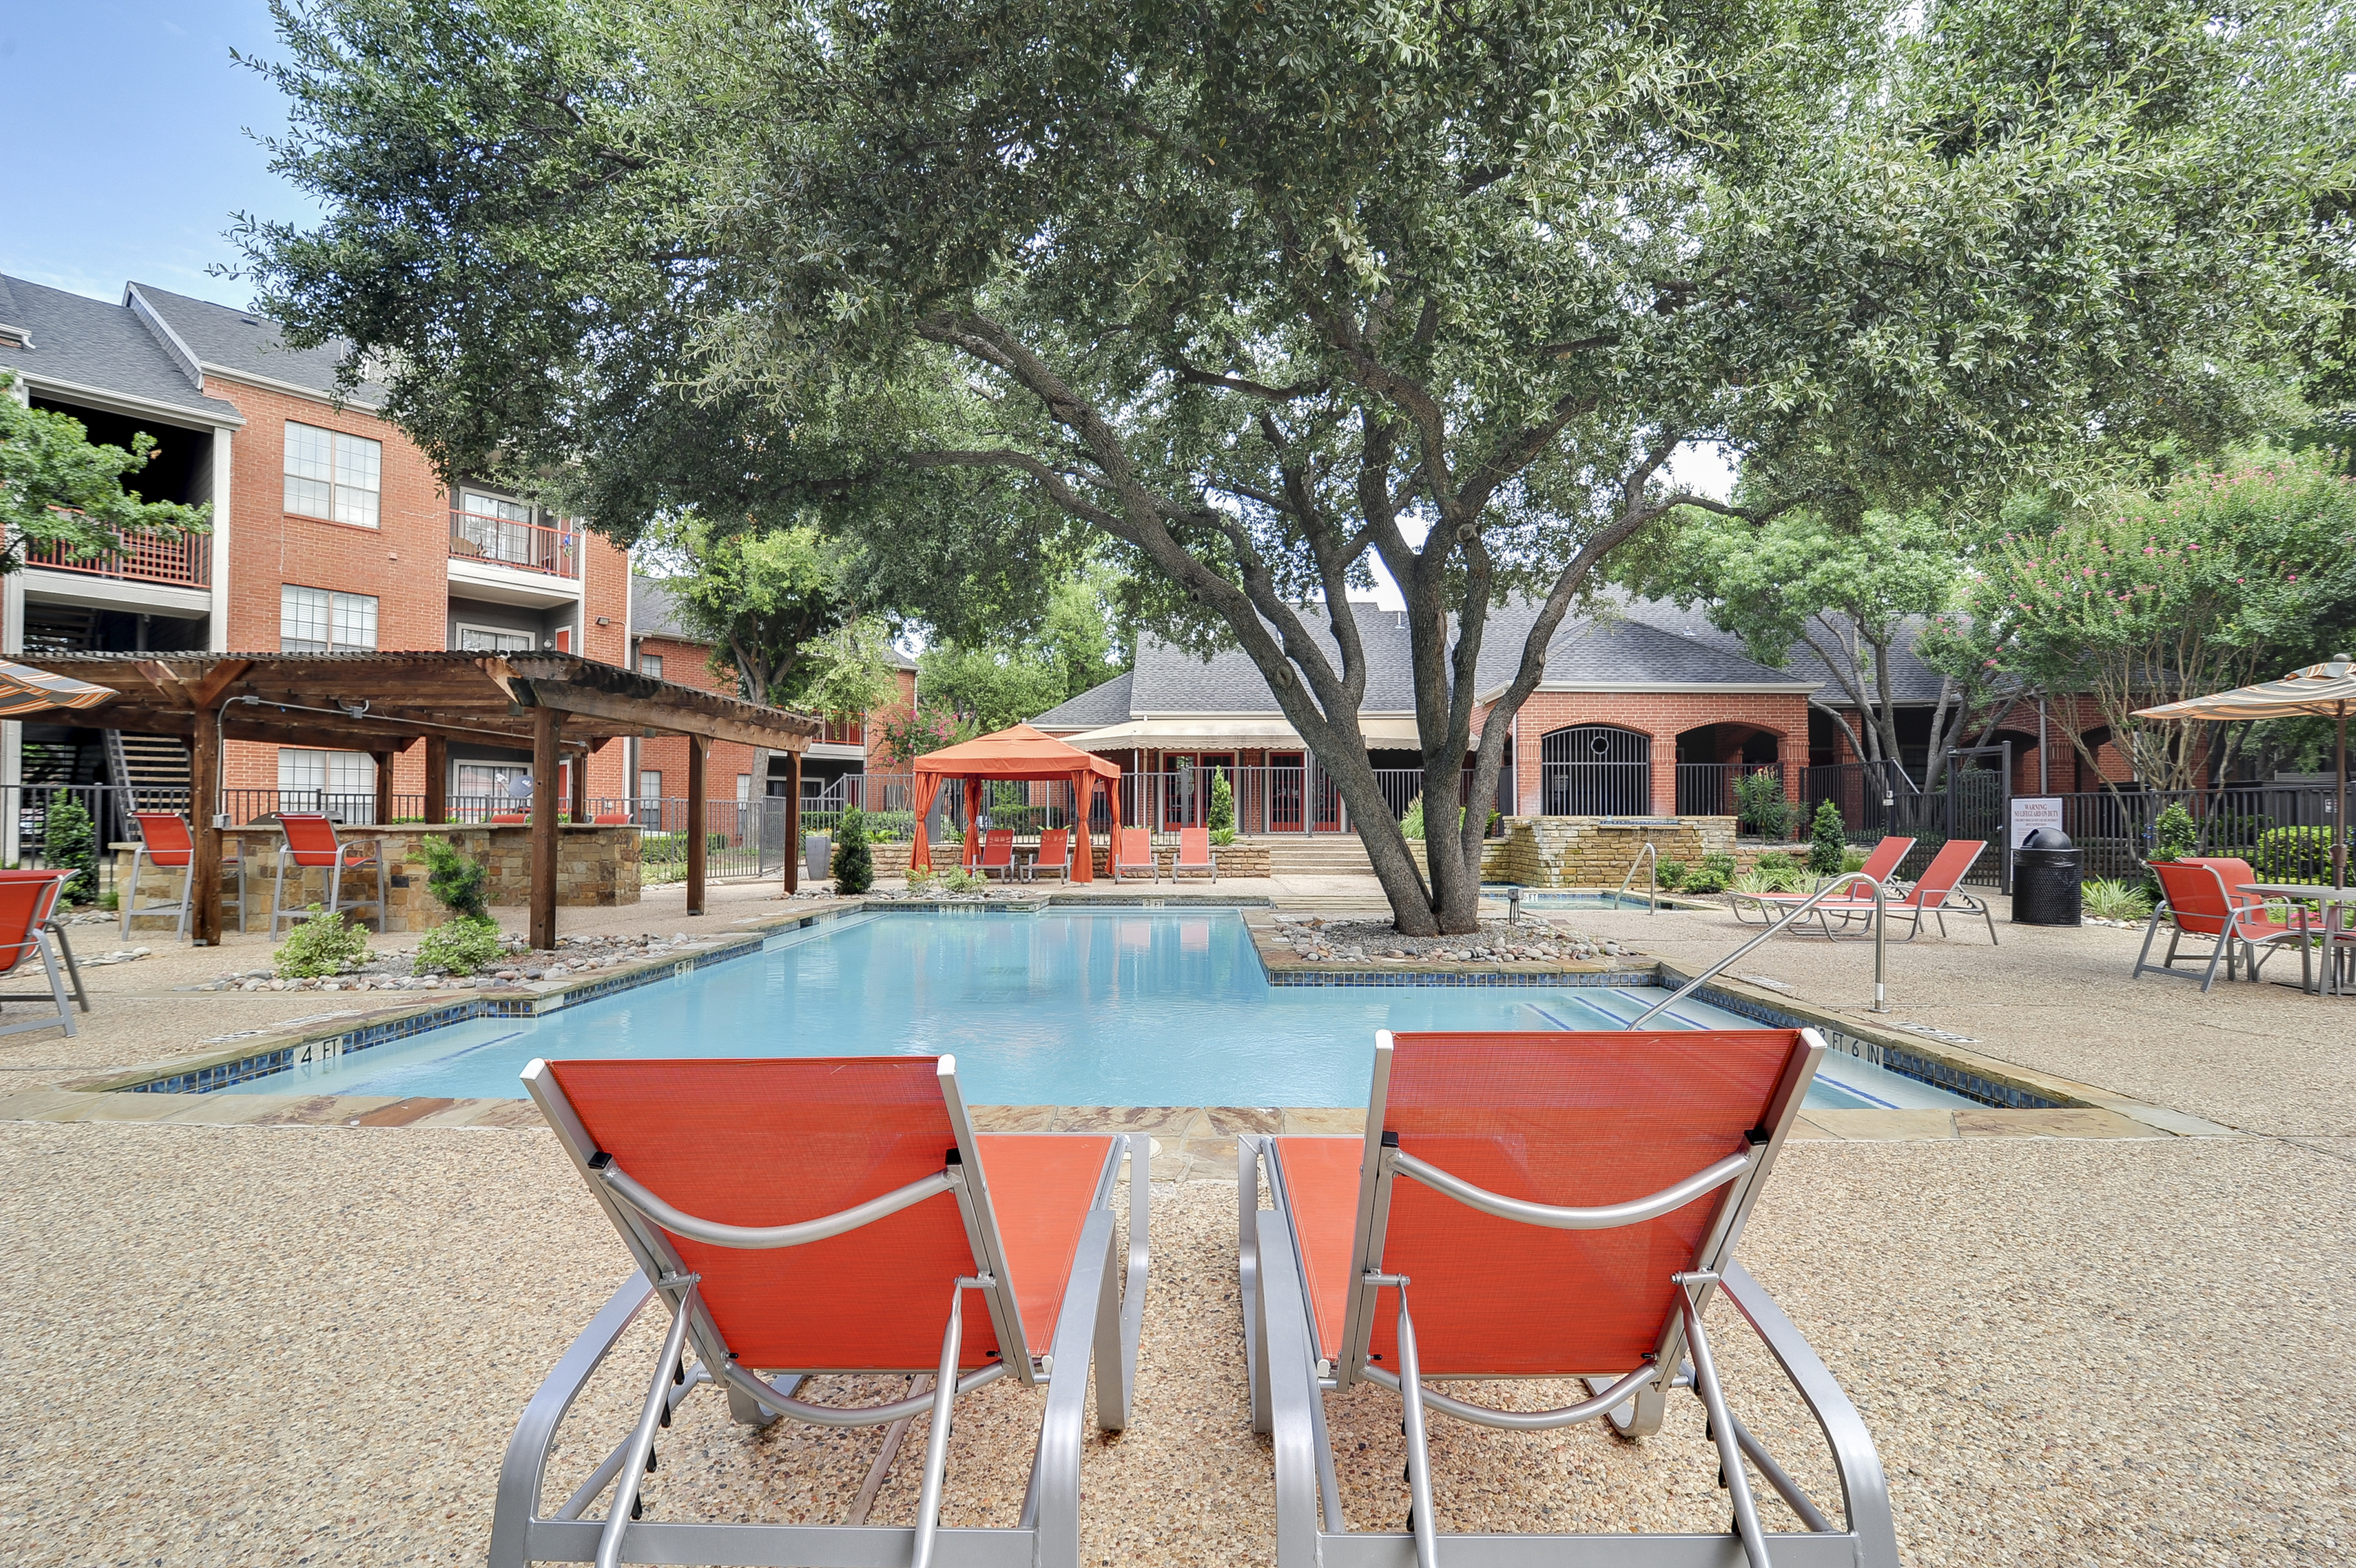 View of Pool Area, Showing Loungers, Grilling Areas, and Building Exteriors at 4804 Haverwood Apartments